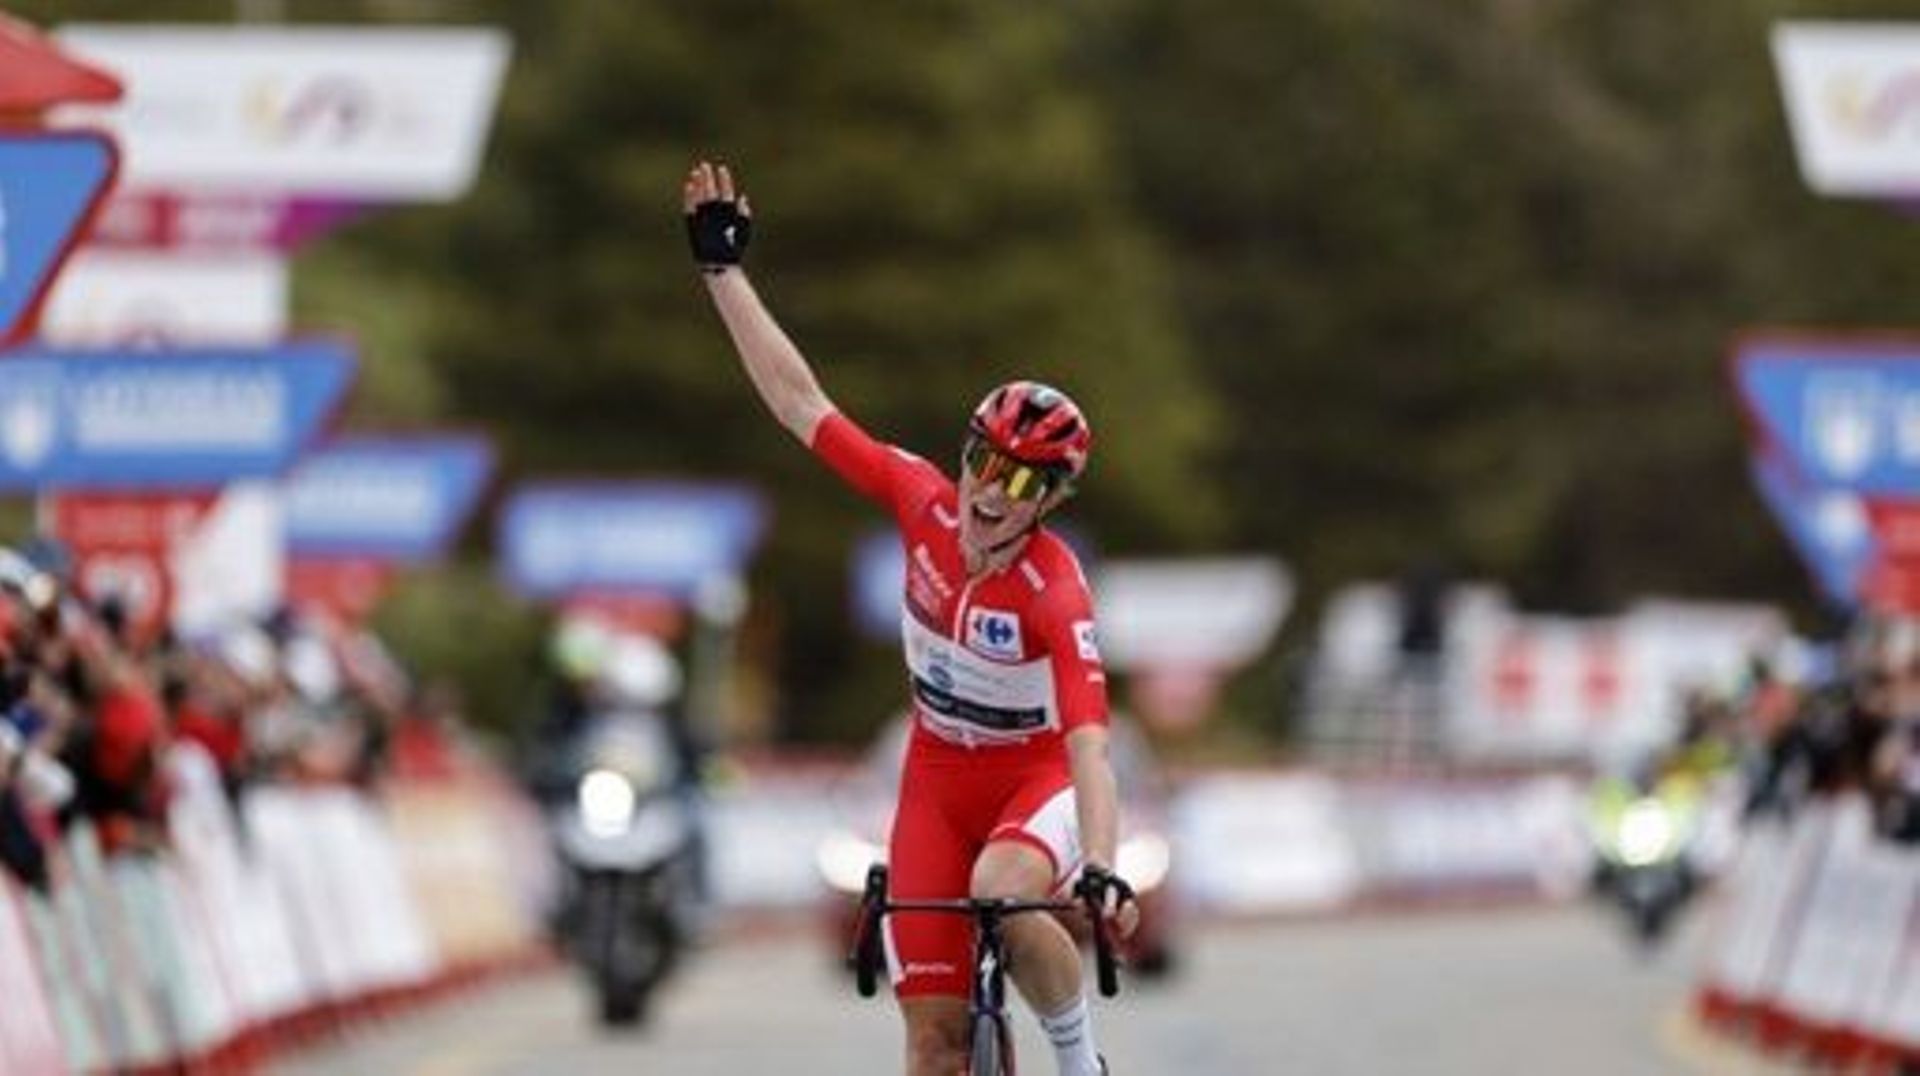 Team SD Worx – Protime’s Dutch rider Demi Vollering celebrates after winning the race and La Vuelta Tour during the 8th stage of the 2024 La Vuelta Femenina cycling tour of Spain, an 89,5 km race from Madrid to Valdesqui ski resort, in Rascafria, on May 5